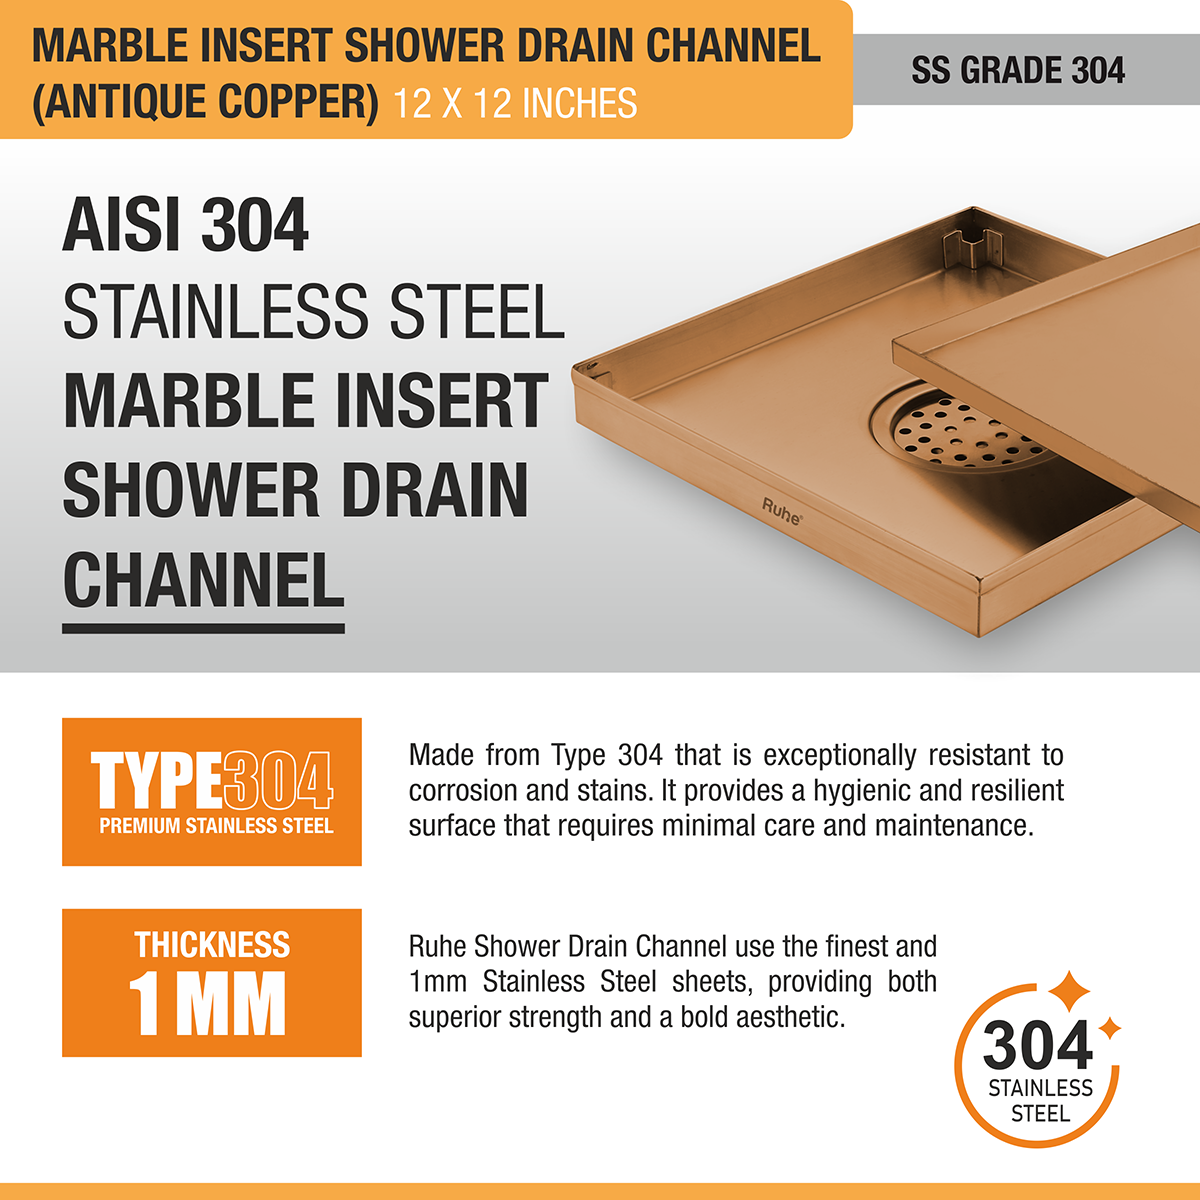 Marble Insert Shower Drain Channel (12 x 12 Inches) ROSE GOLD/ ANTIQUE COPPER stainless steel